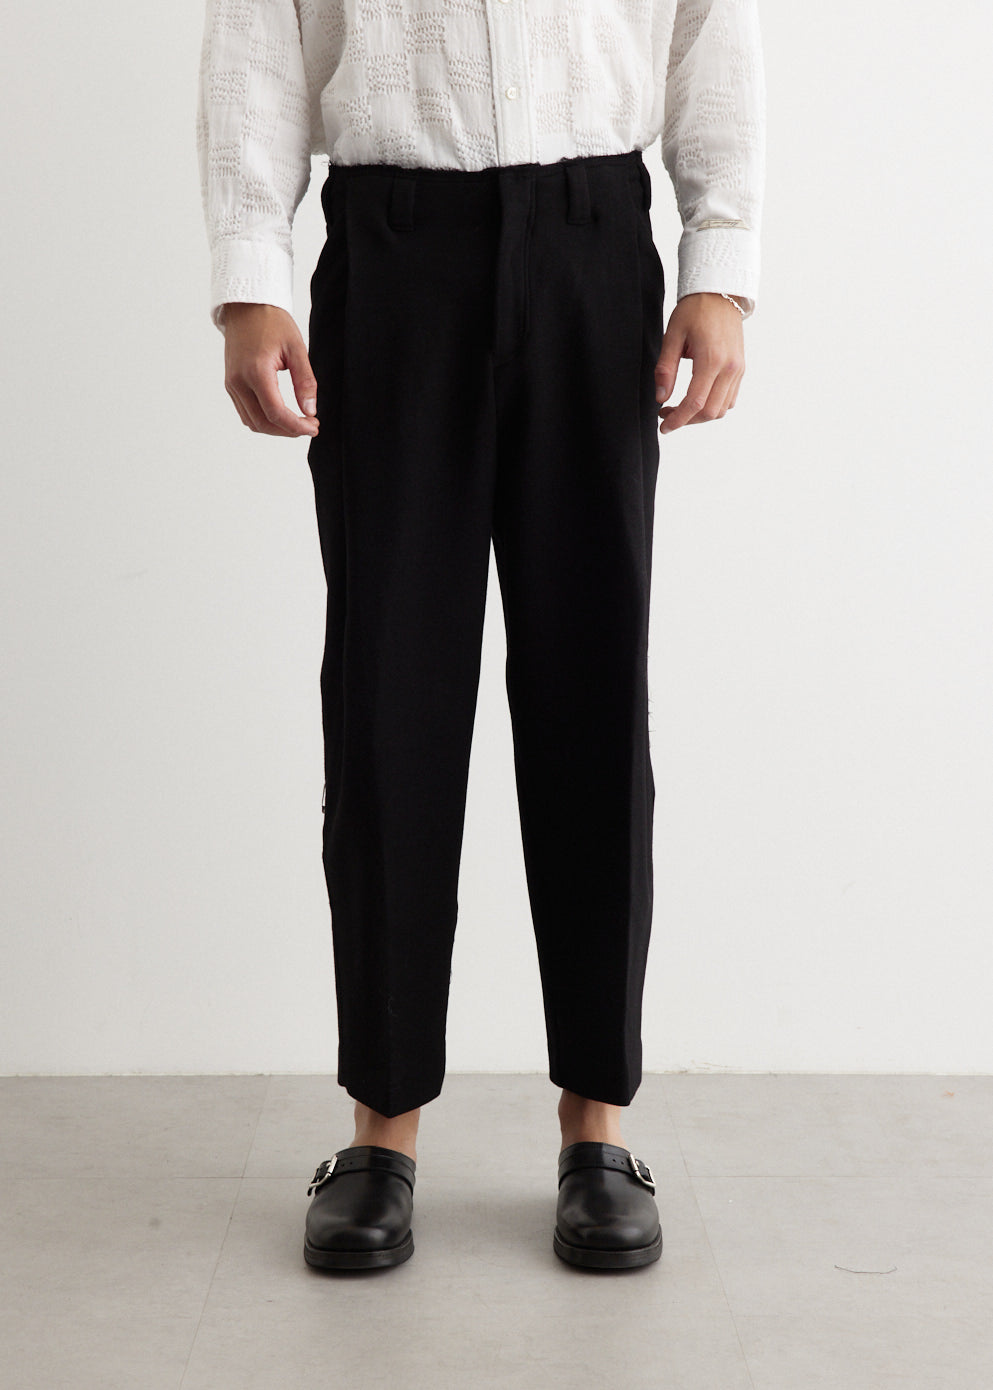 Incision Line Trousers